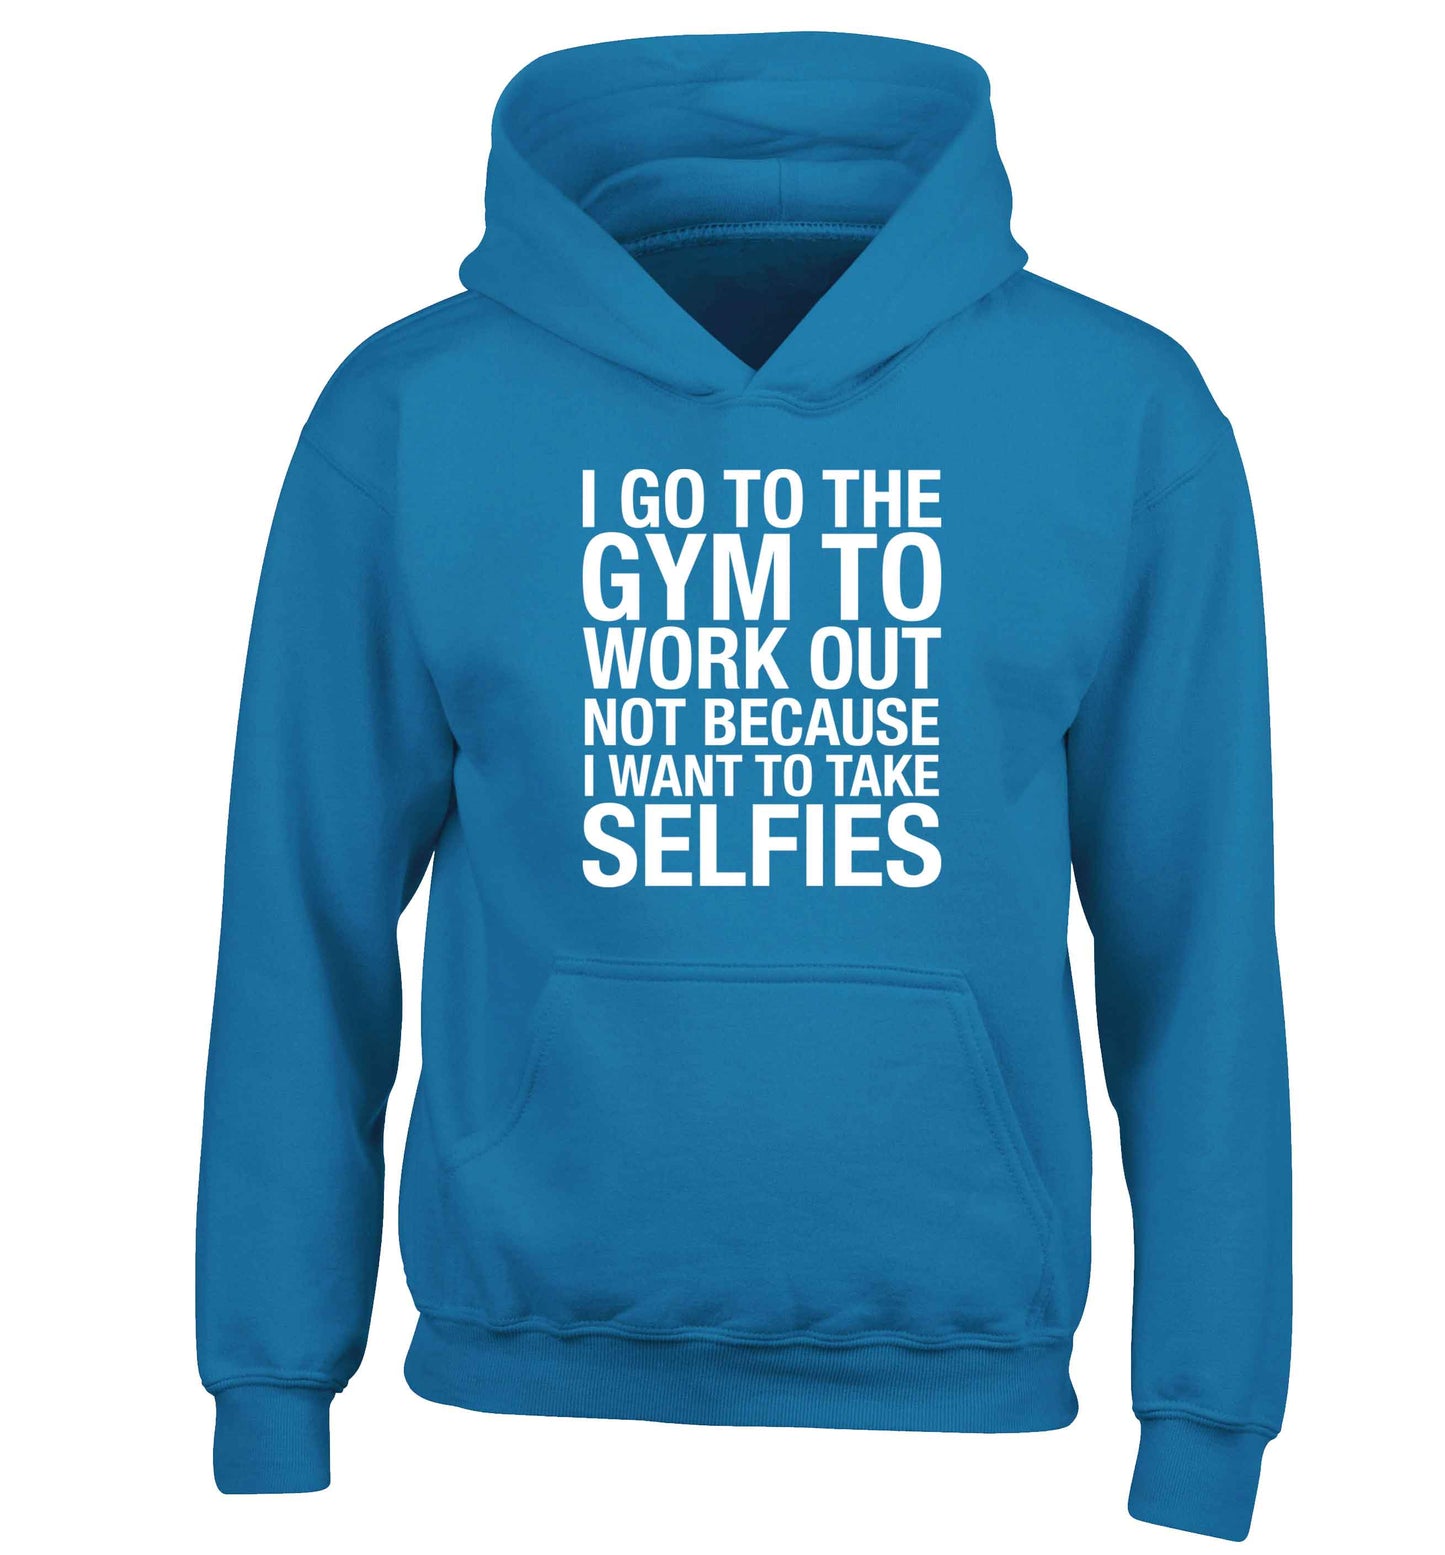 I go to the gym to workout not to take selfies children's blue hoodie 12-13 Years